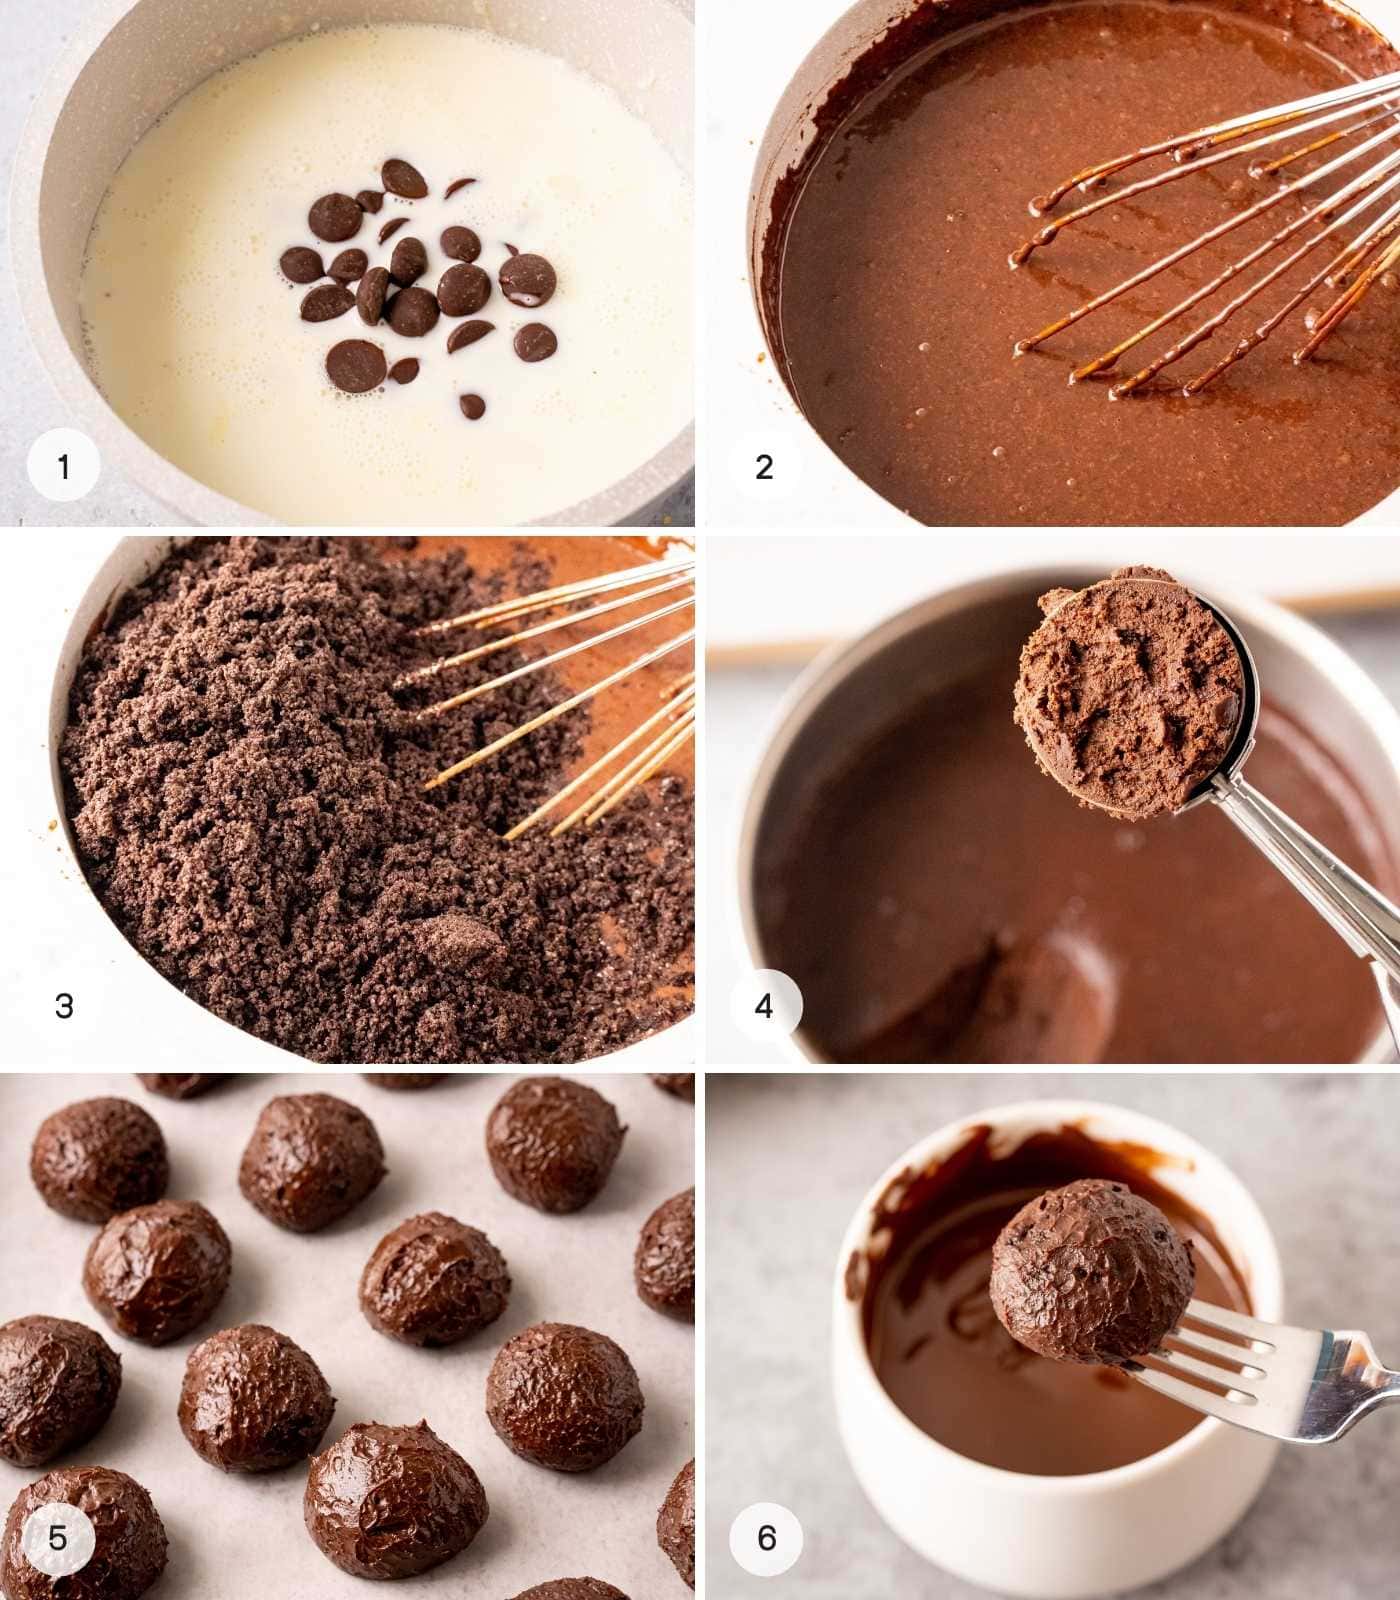 A collage with 6 images showing how to make Oreo truffles